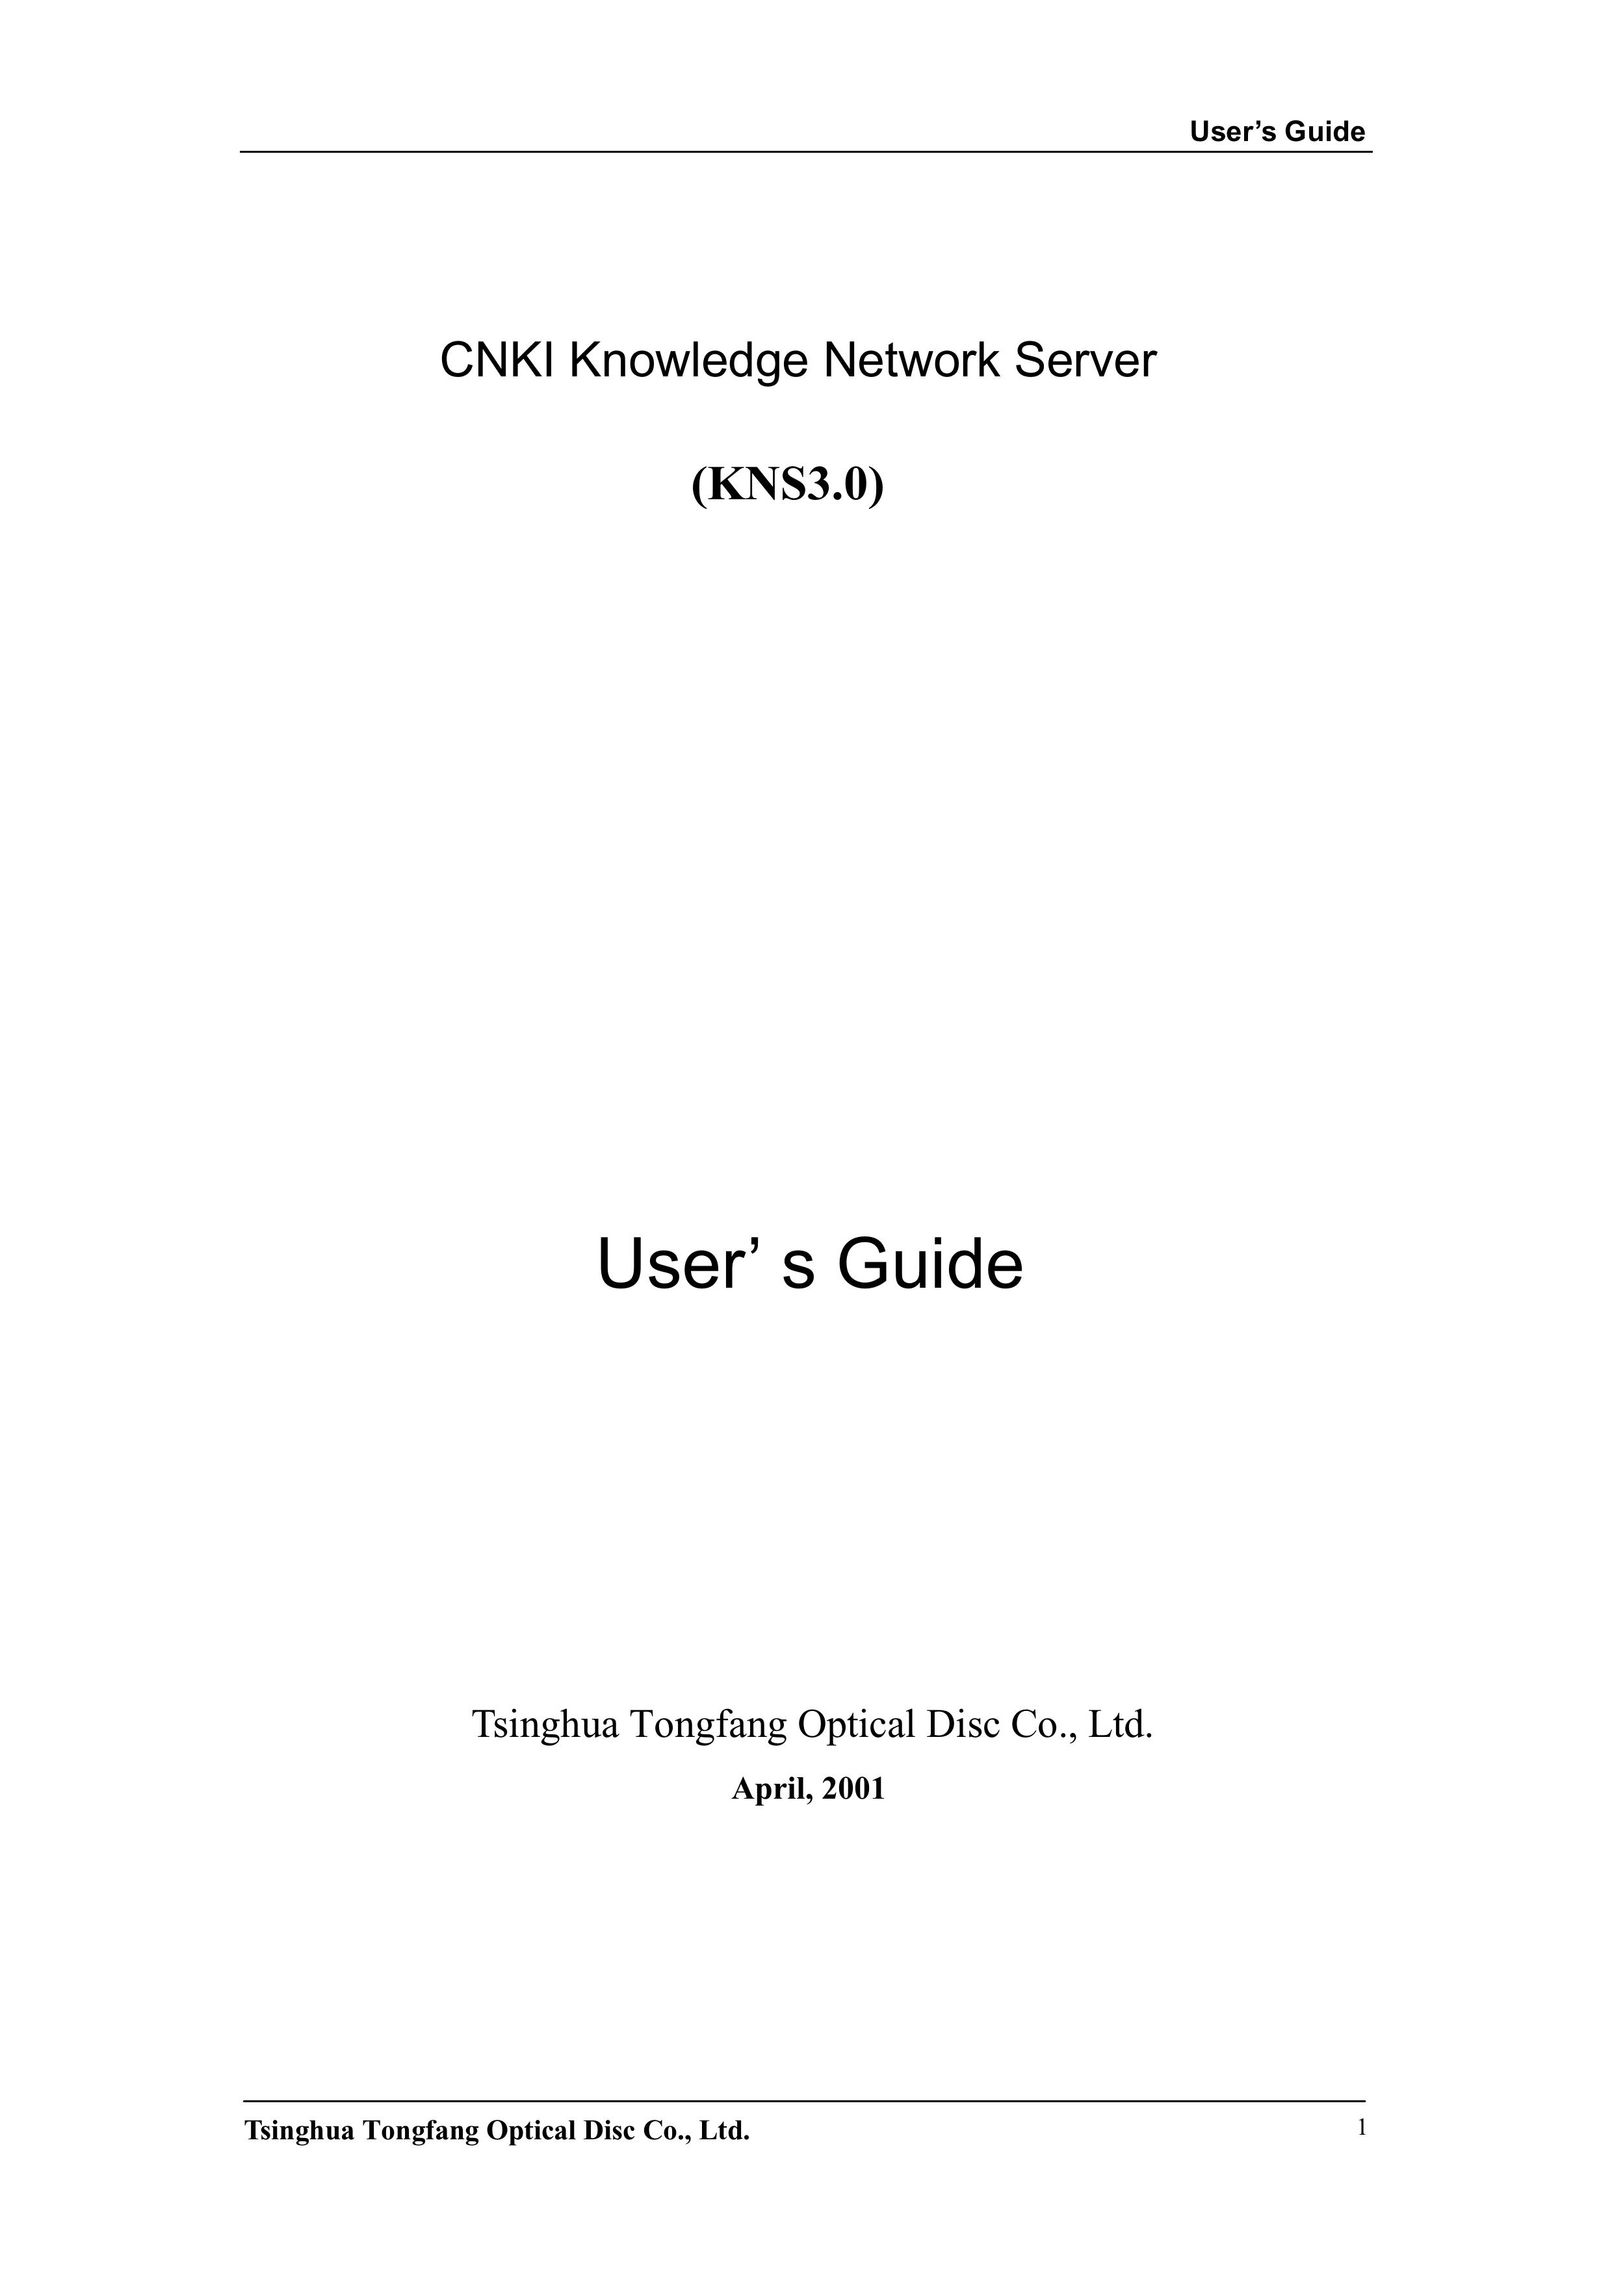 Network Computing Devices KNS3.0 Server User Manual